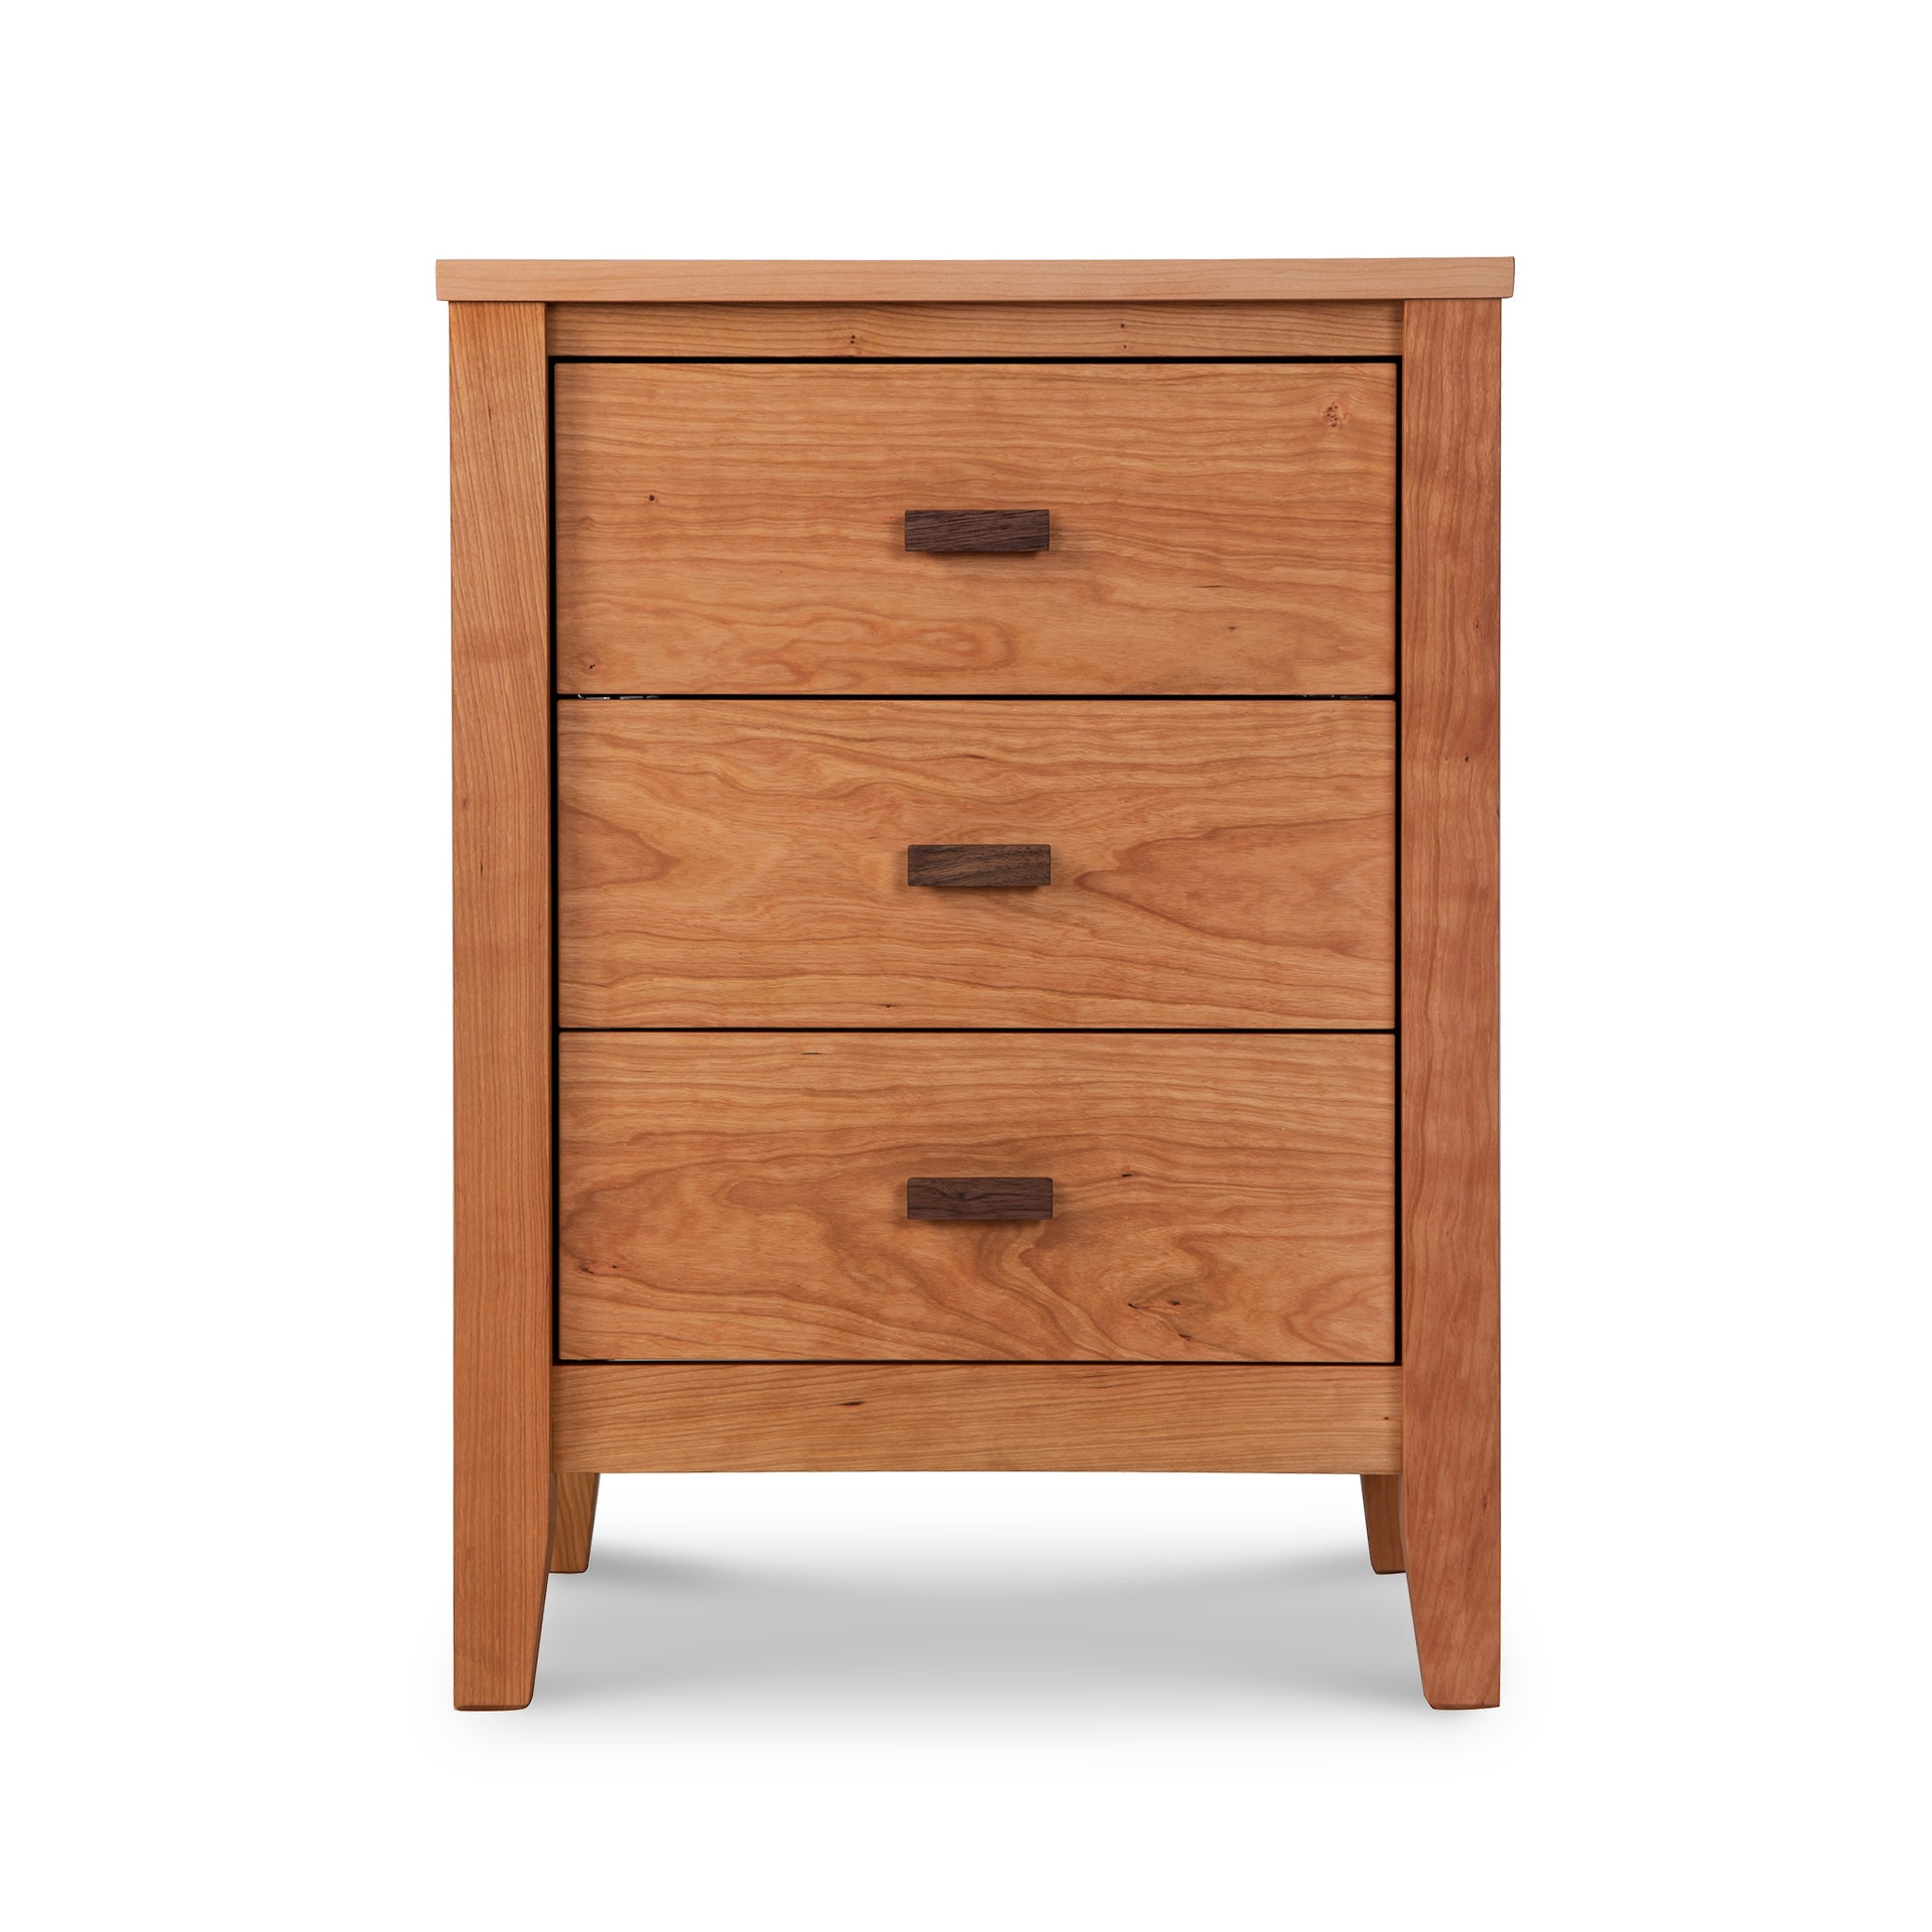 A Maple Corner Woodworks Andover Modern 3-Drawer Nightstand with simple, rectangular pulls on a plain white background. The nightstand features a subtle overhang on the top and understated side paneling. It is designed as eco-friendly.